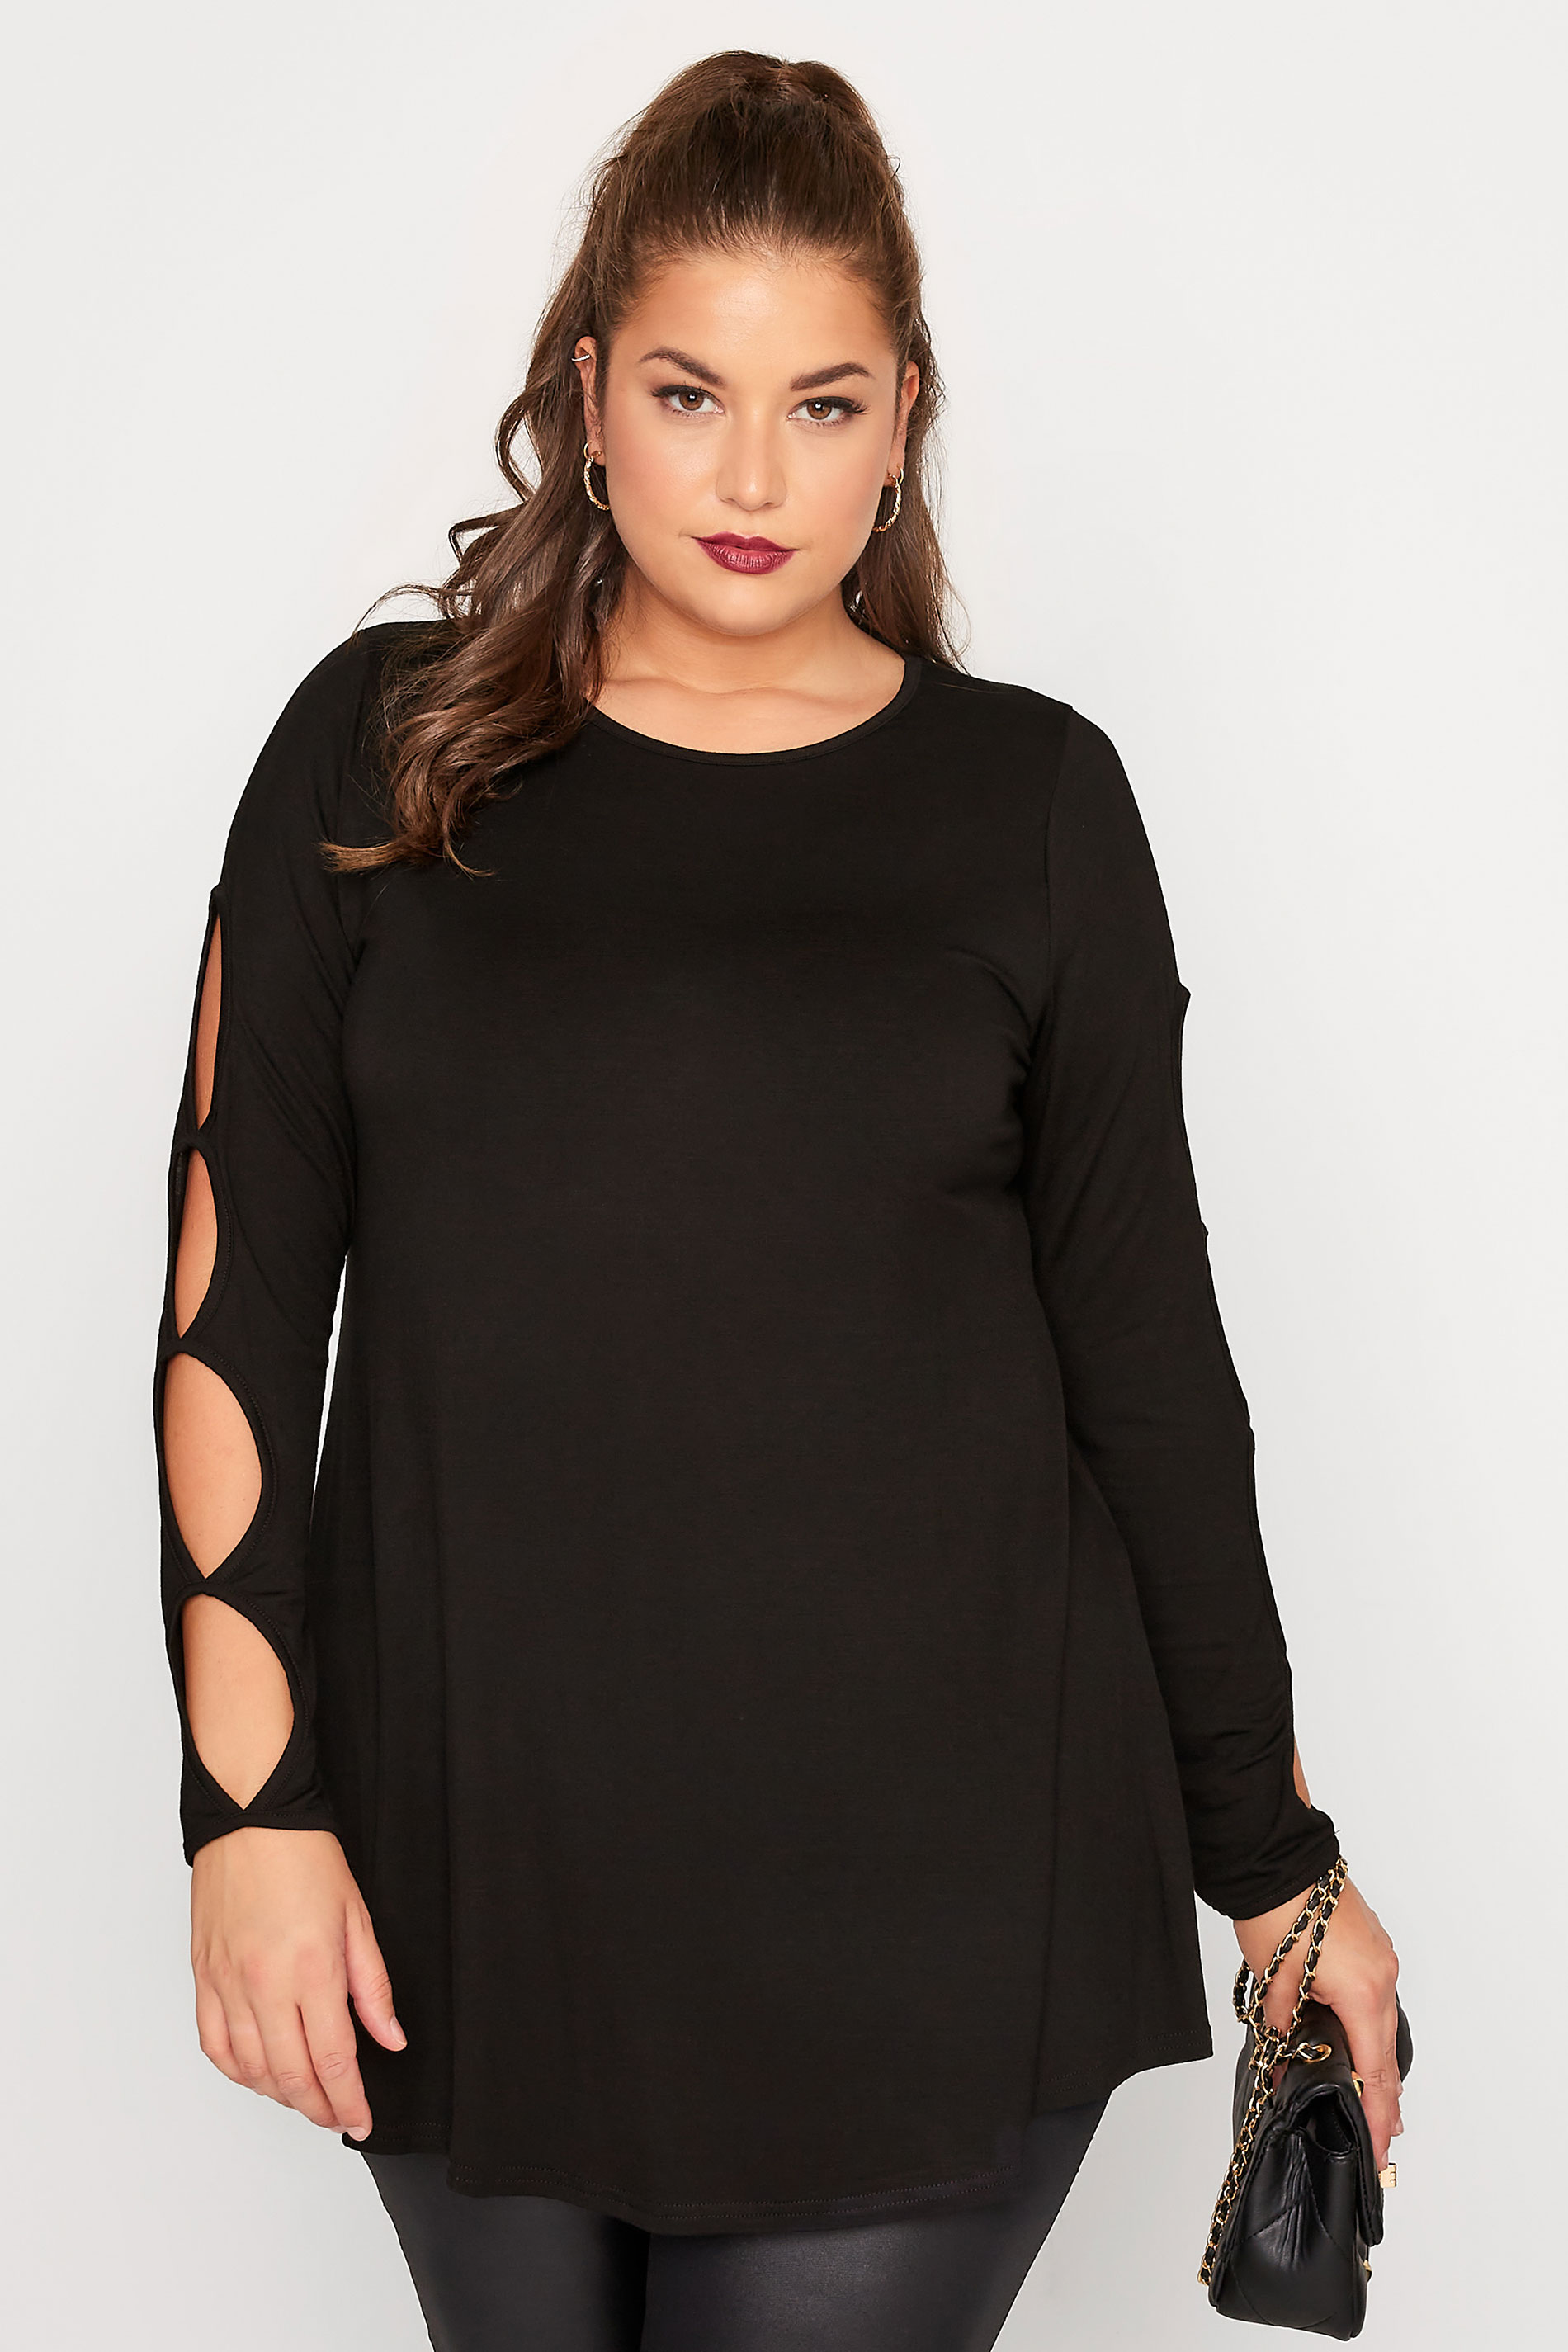 LIMITED COLLECTION Curve Black Cut Out Sleeve Top 1